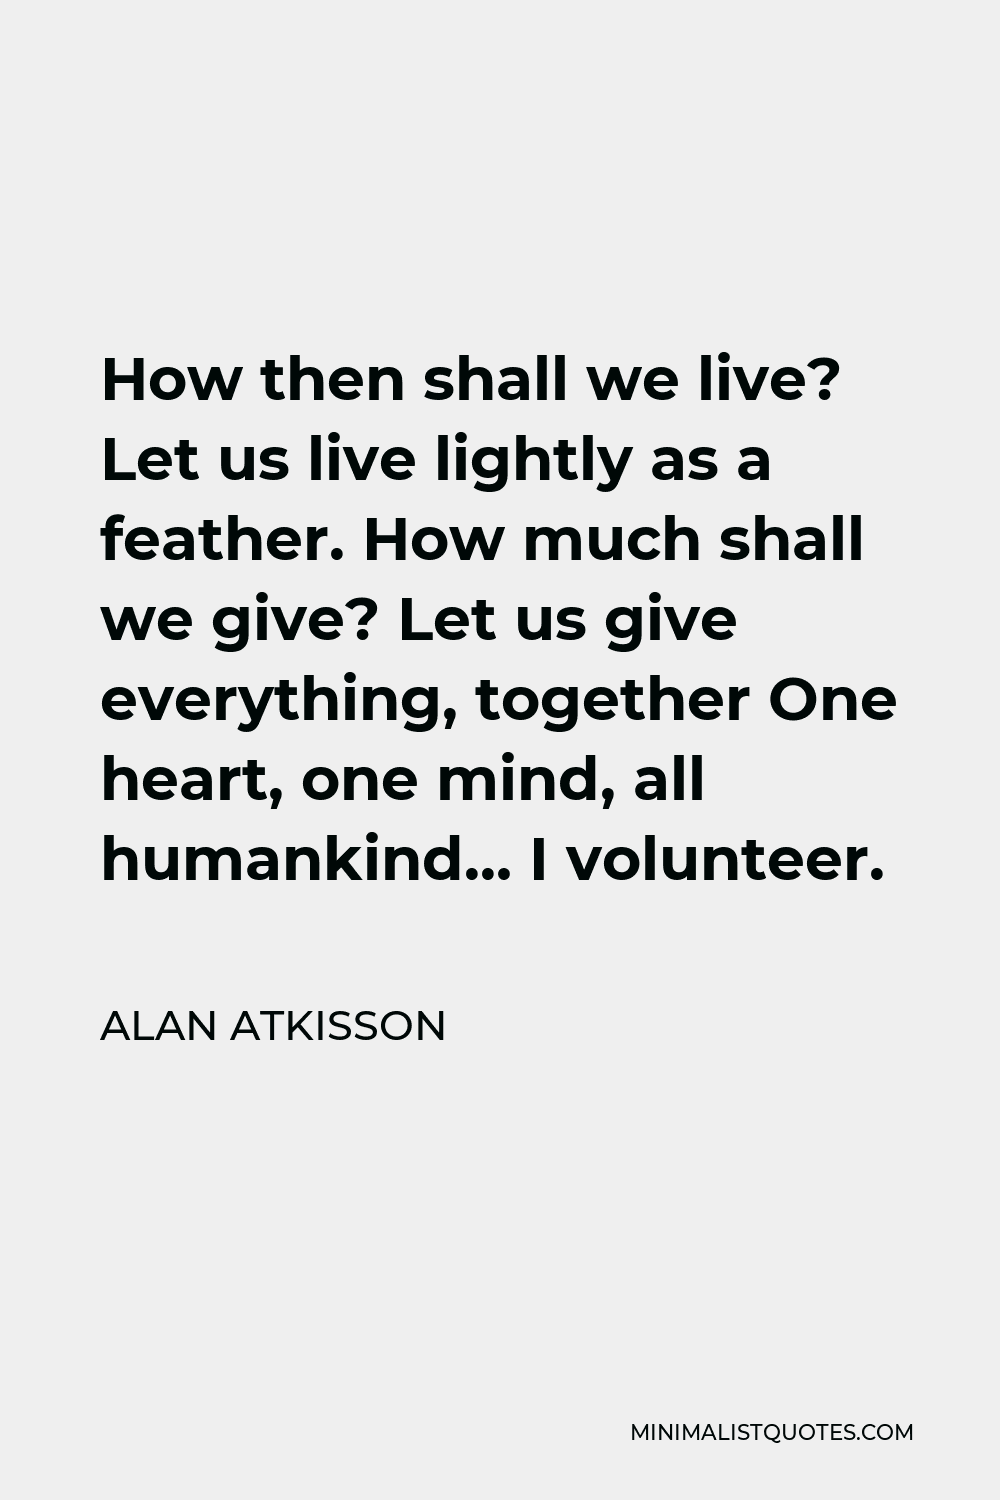 Alan AtKisson Quote - How then shall we live? Let us live lightly as a feather. How much shall we give? Let us give everything, together One heart, one mind, all humankind… I volunteer.